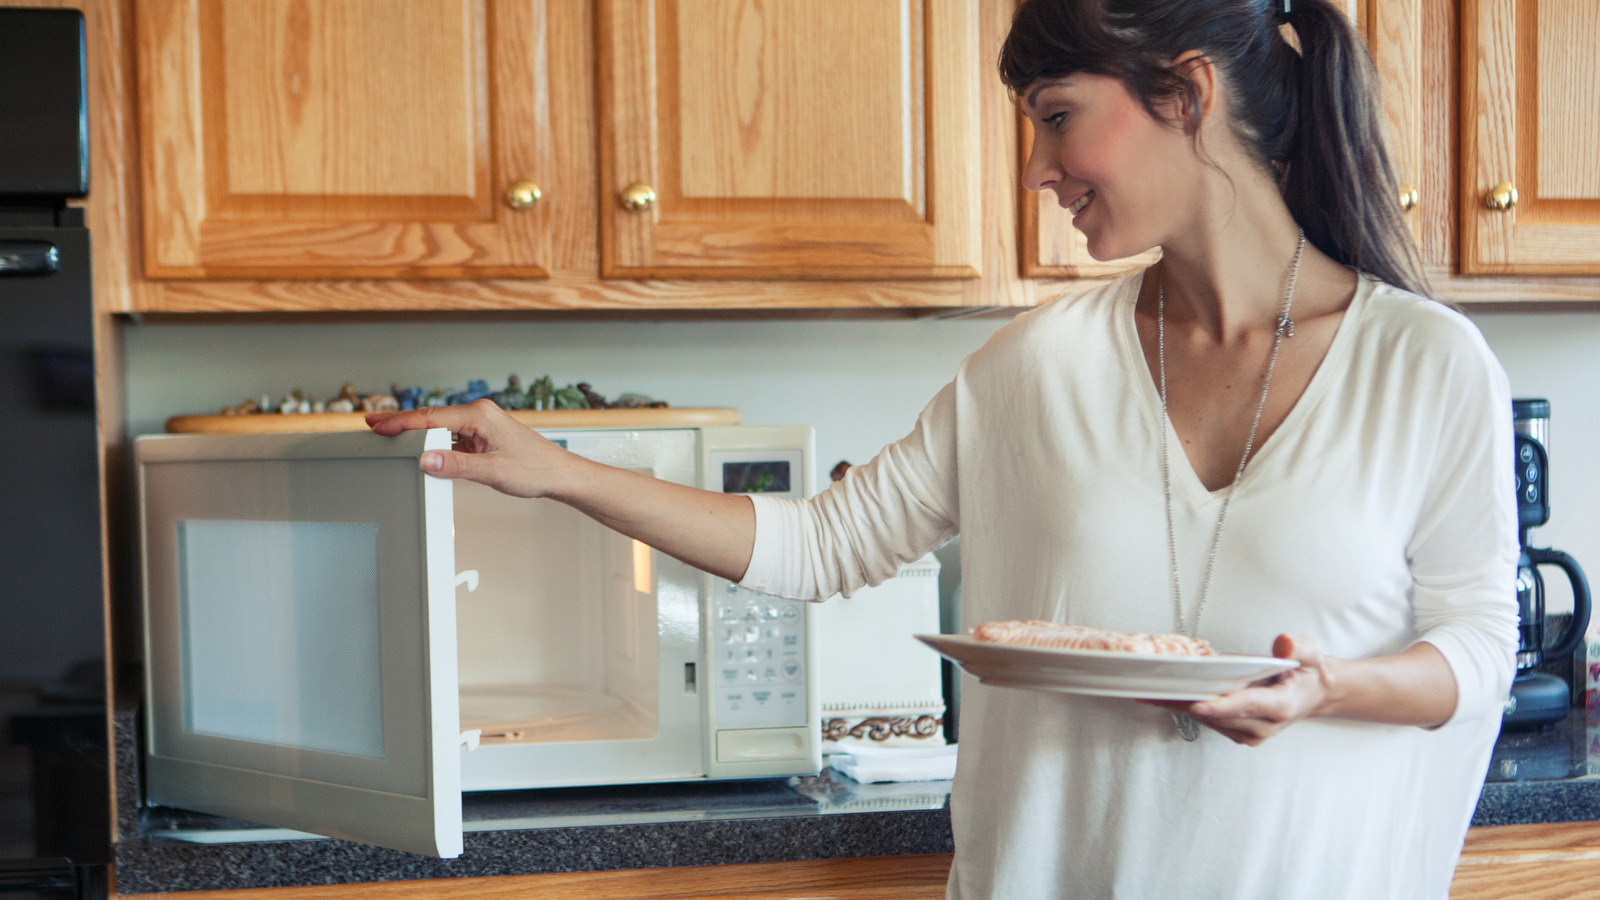 How To Prevent A Microwave 'Eruption' According To The USDA - Health Digest